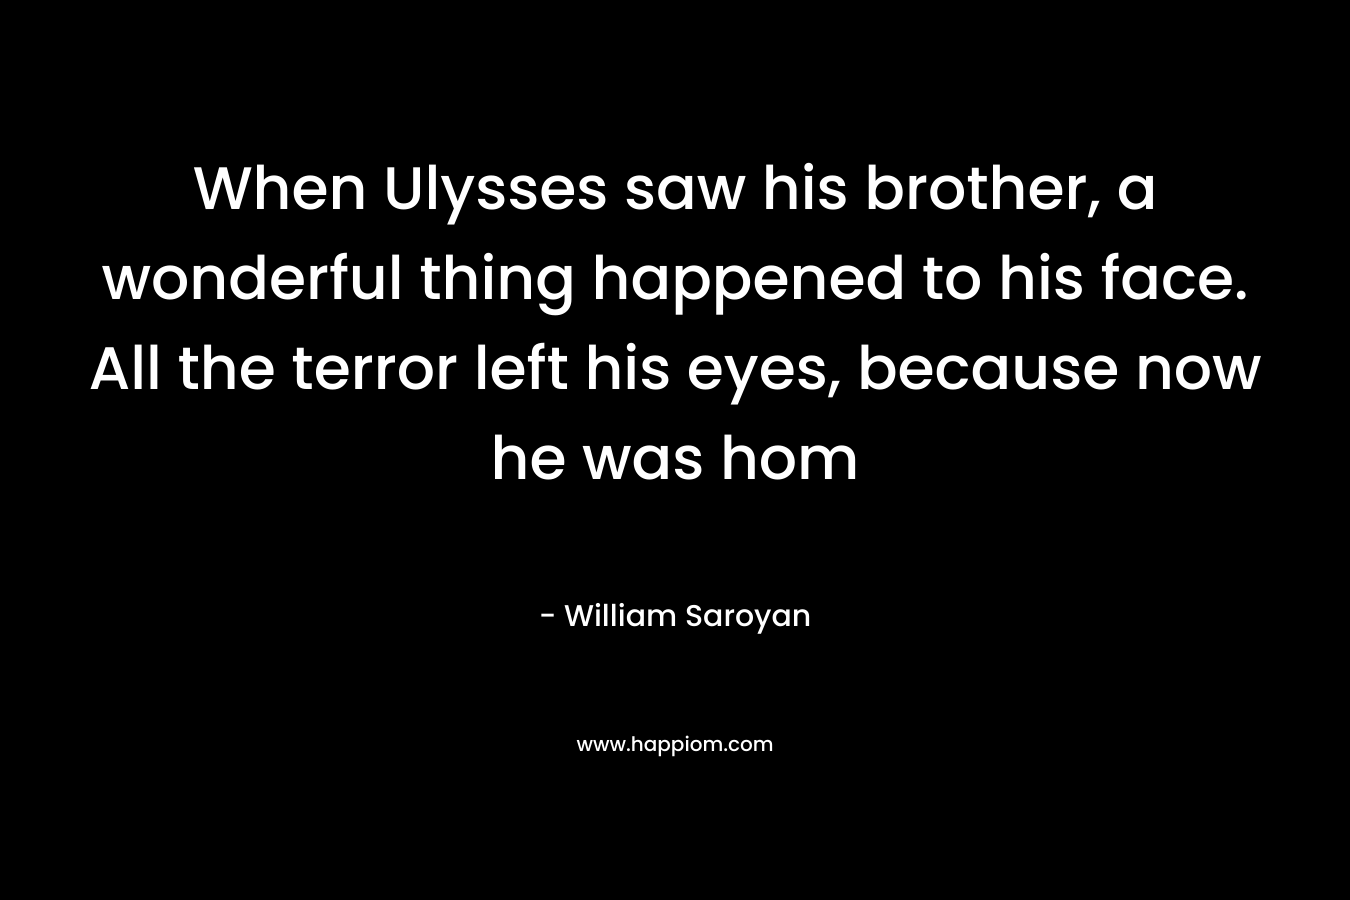 When Ulysses saw his brother, a wonderful thing happened to his face. All the terror left his eyes, because now he was hom – William Saroyan